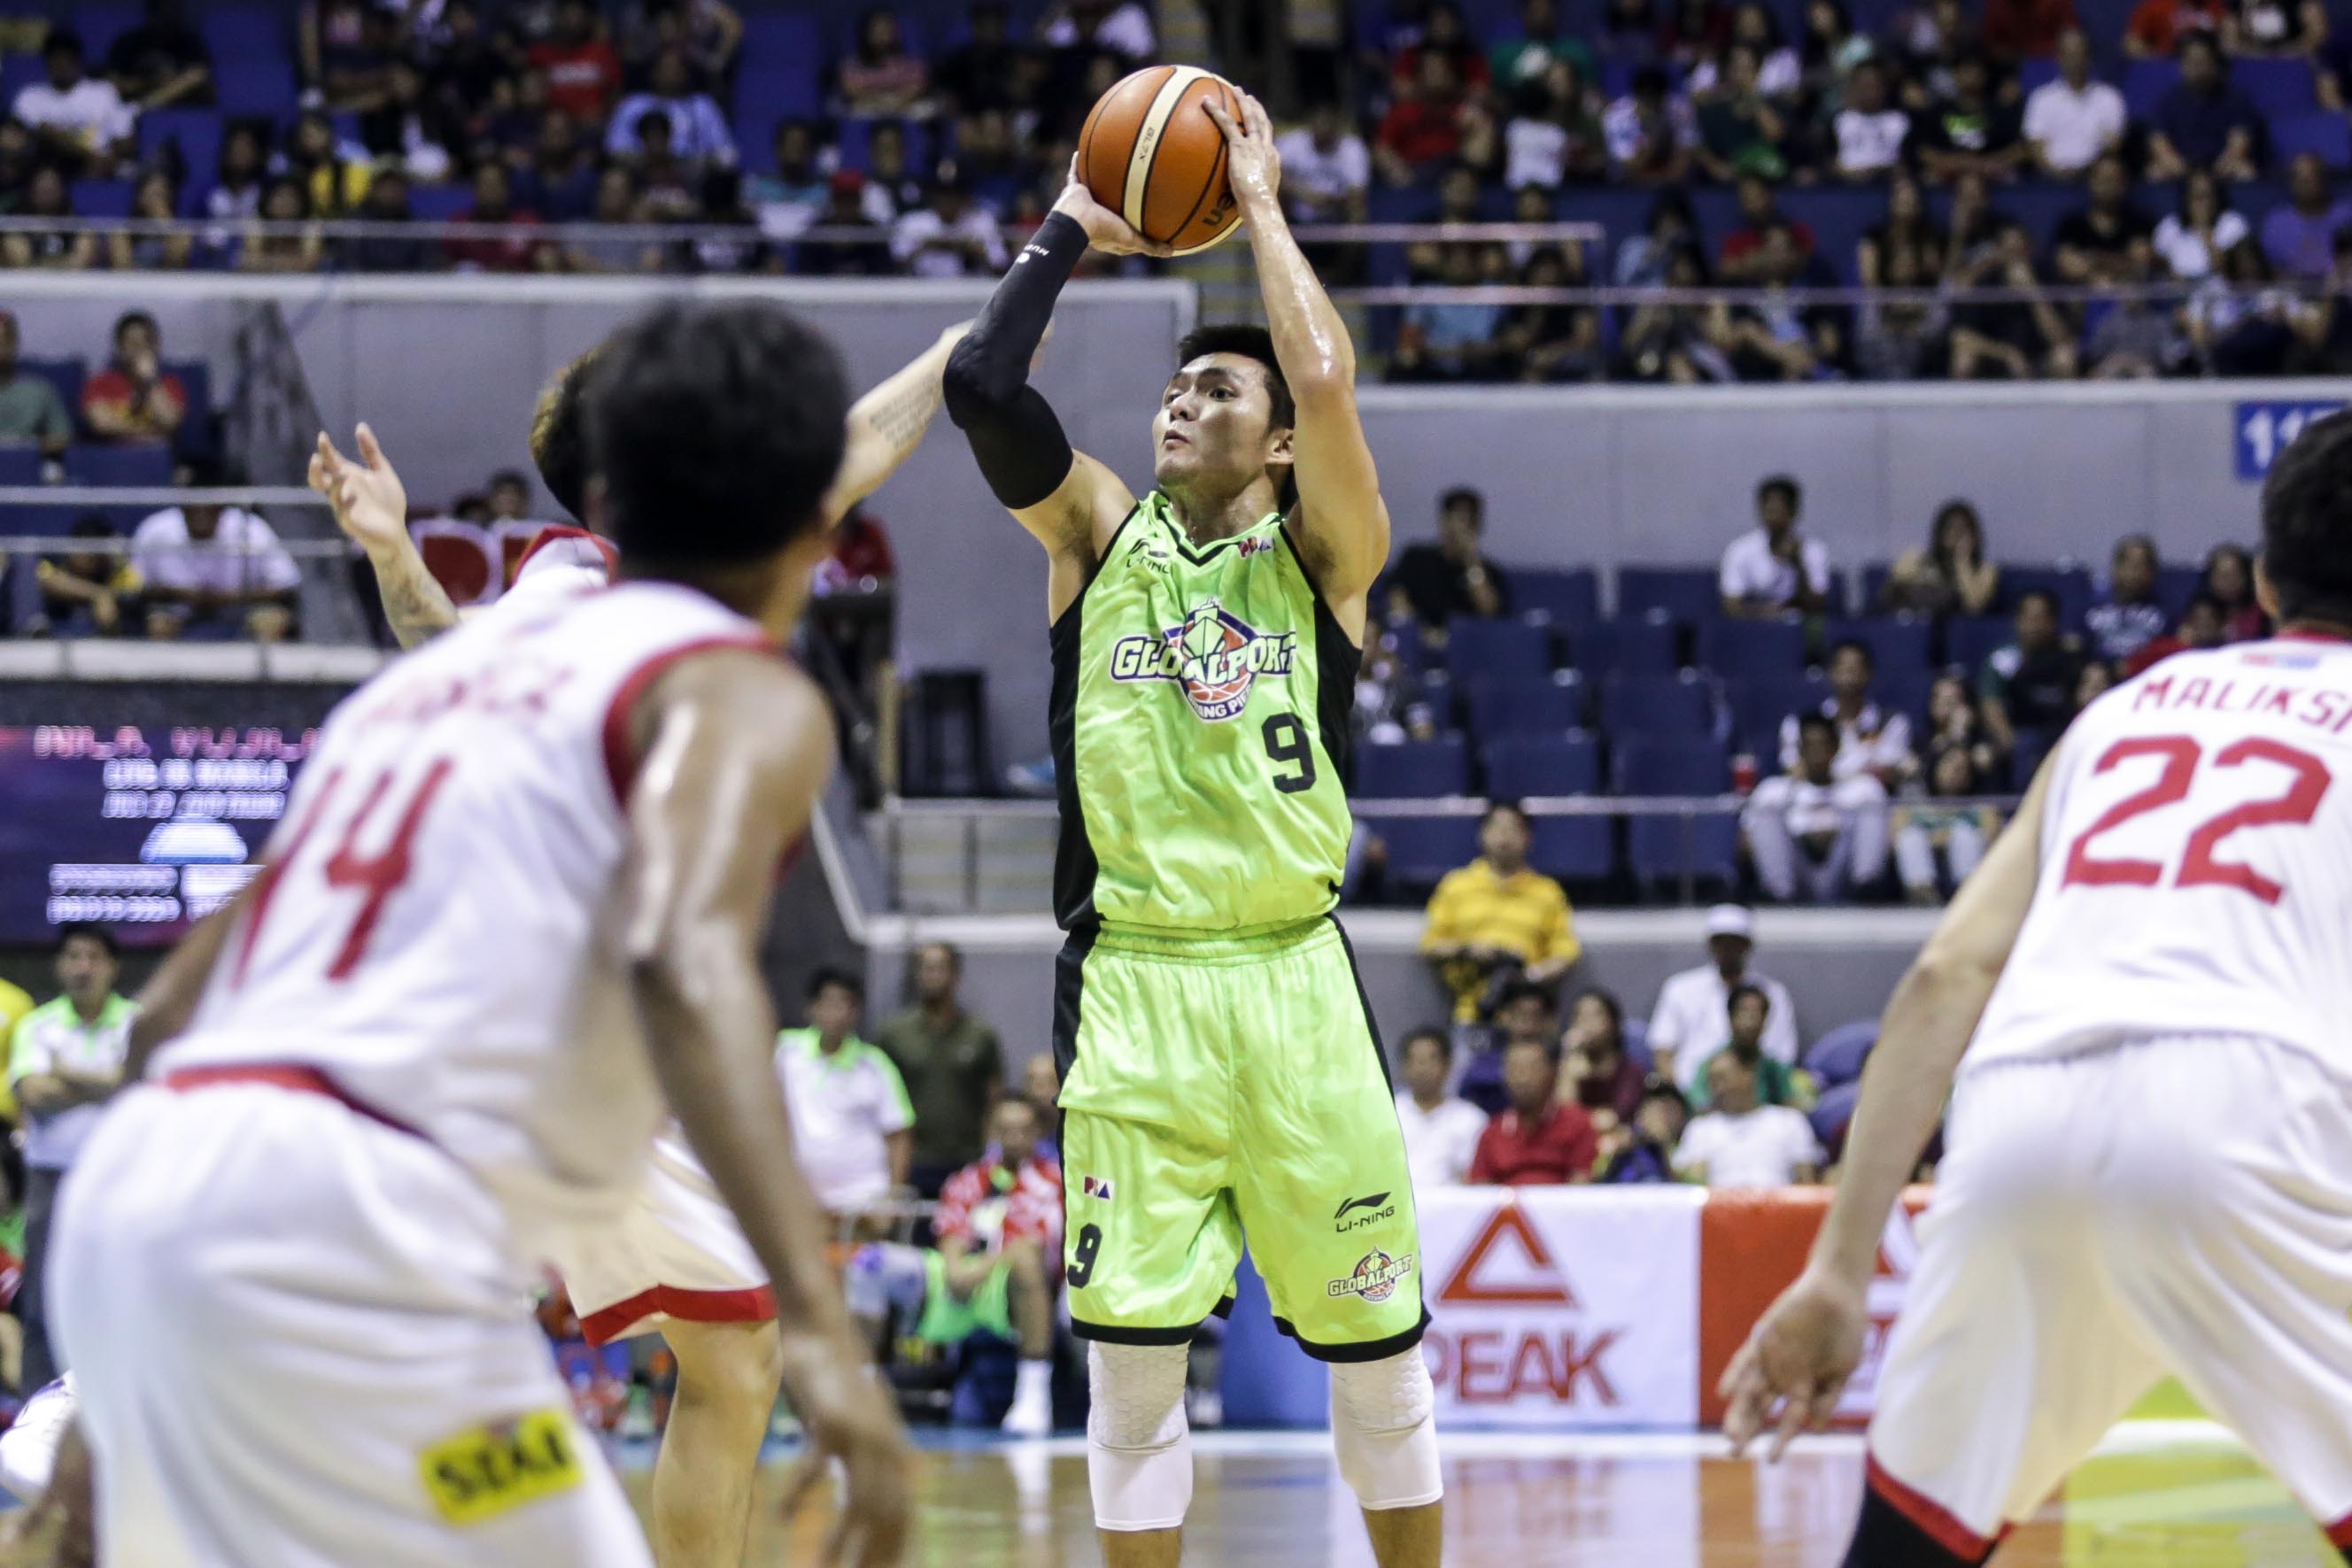 Joseph Yeo in a Globalport jersey. Photo by Tristan Tamayo/INQUIRER.net